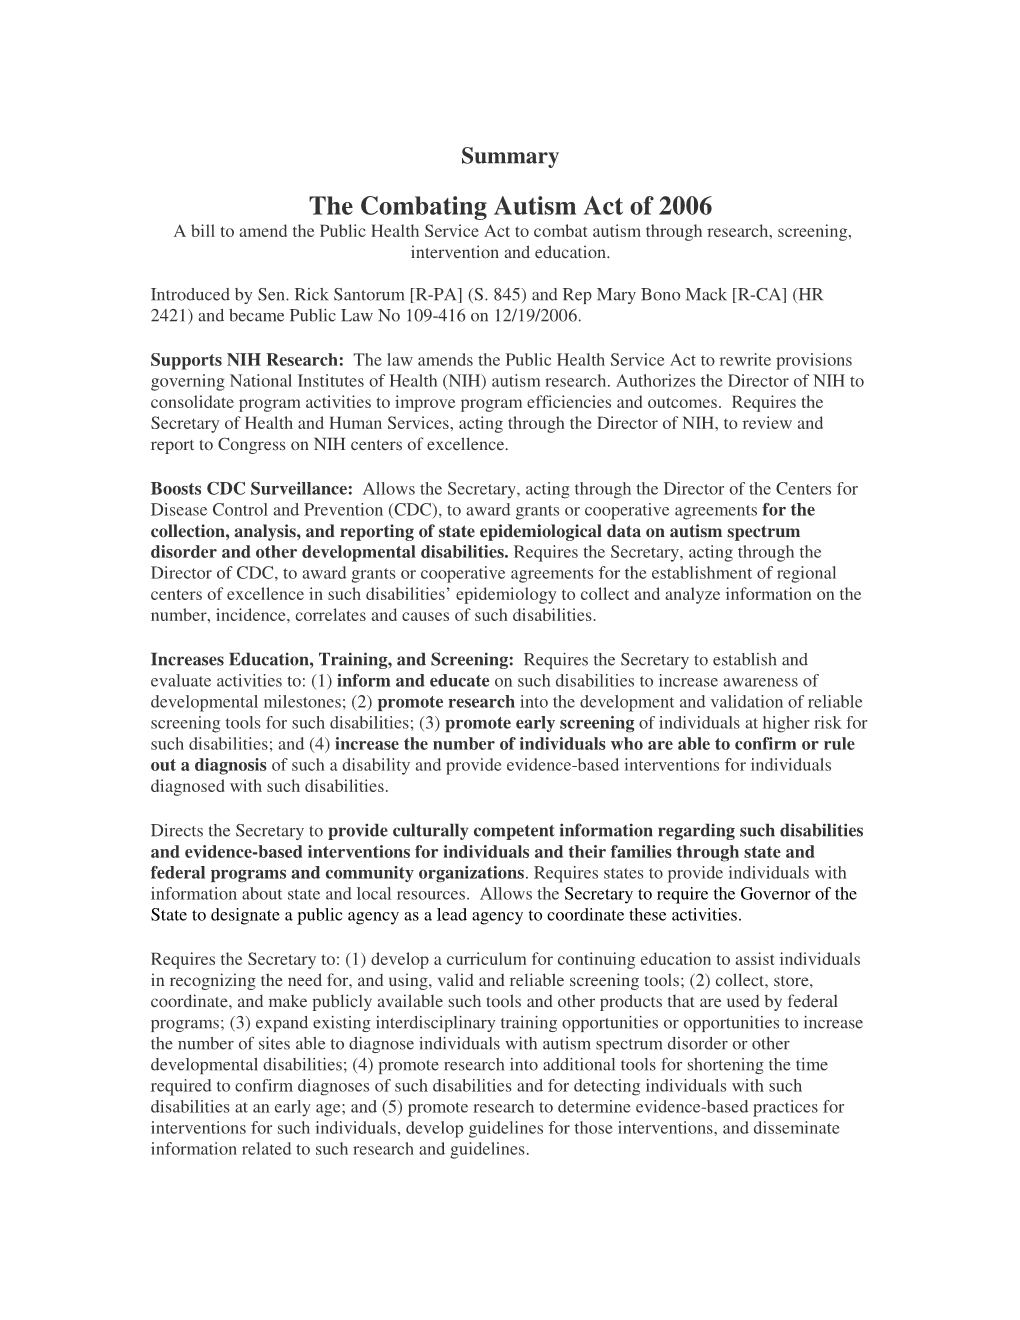 The Combating Autism Act of 2006 a Bill to Amend the Public Health Service Act to Combat Autism Through Research, Screening, Intervention and Education